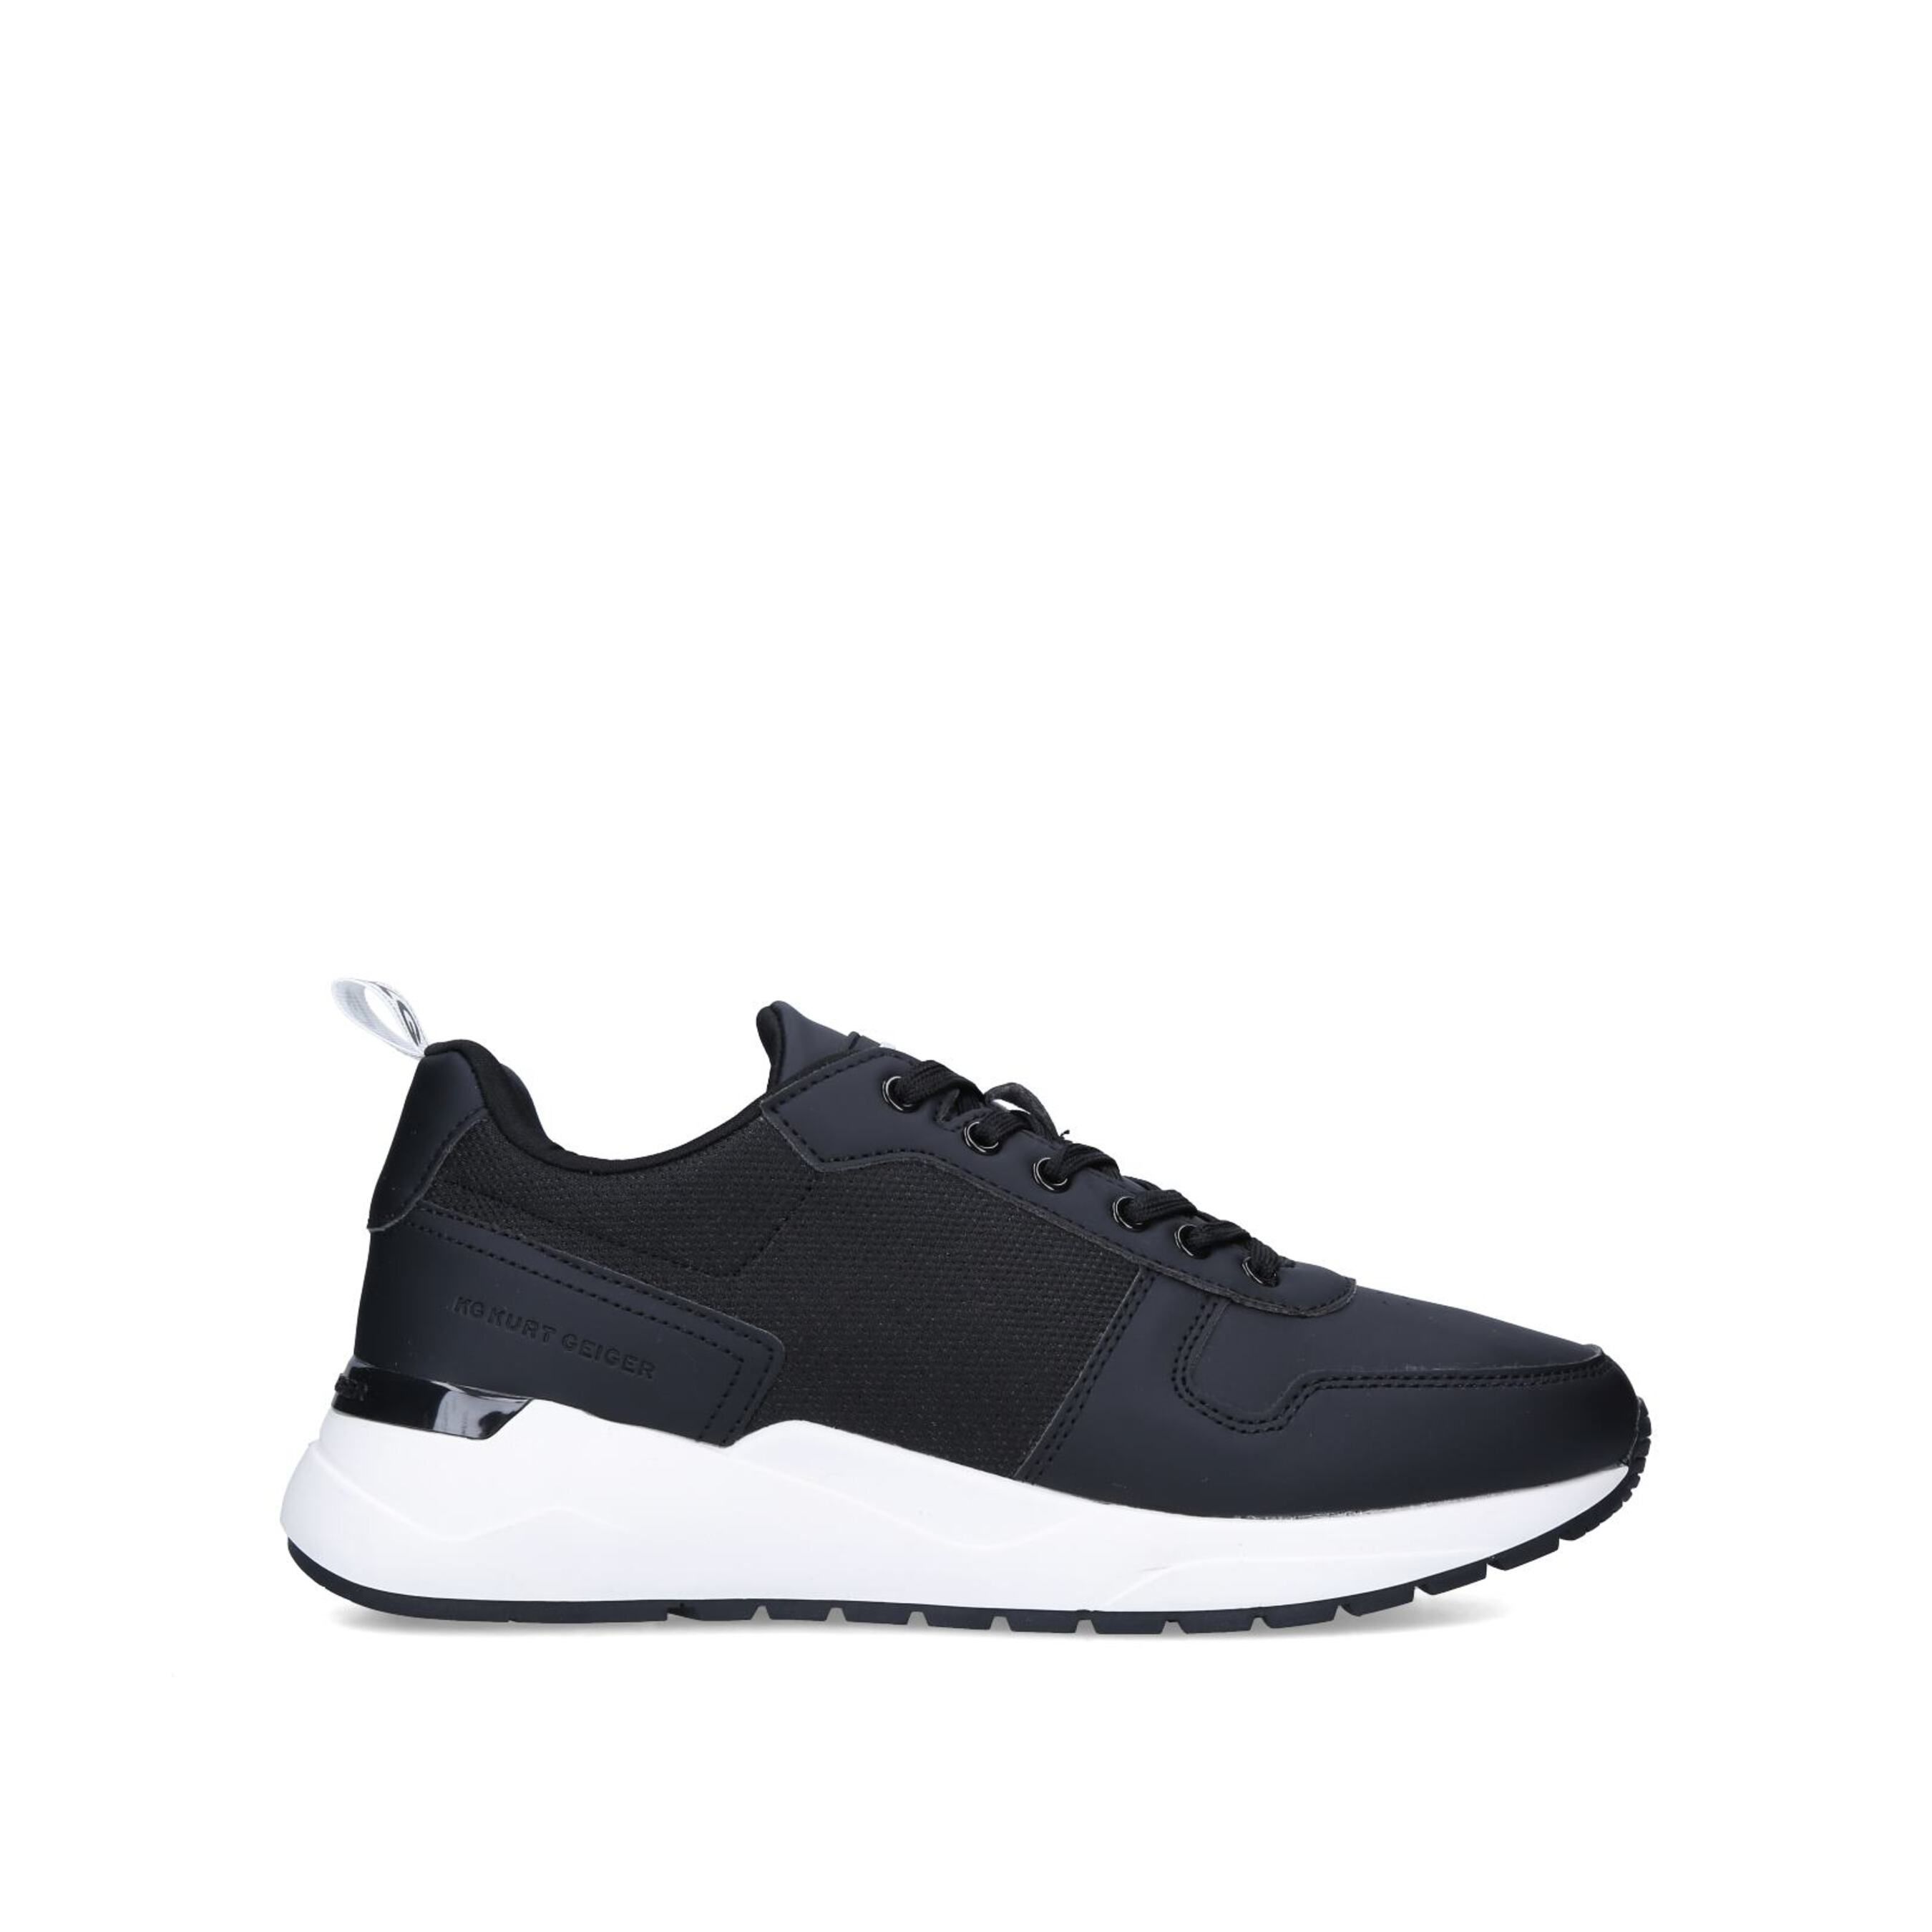 The Kofi sneakers are a timeless style to wear season after season. Their upper is in a black shade with lace up front above a branded tongue. The back of the ankle features a black and white pull tab all sitting on a white sole with black branded panel.